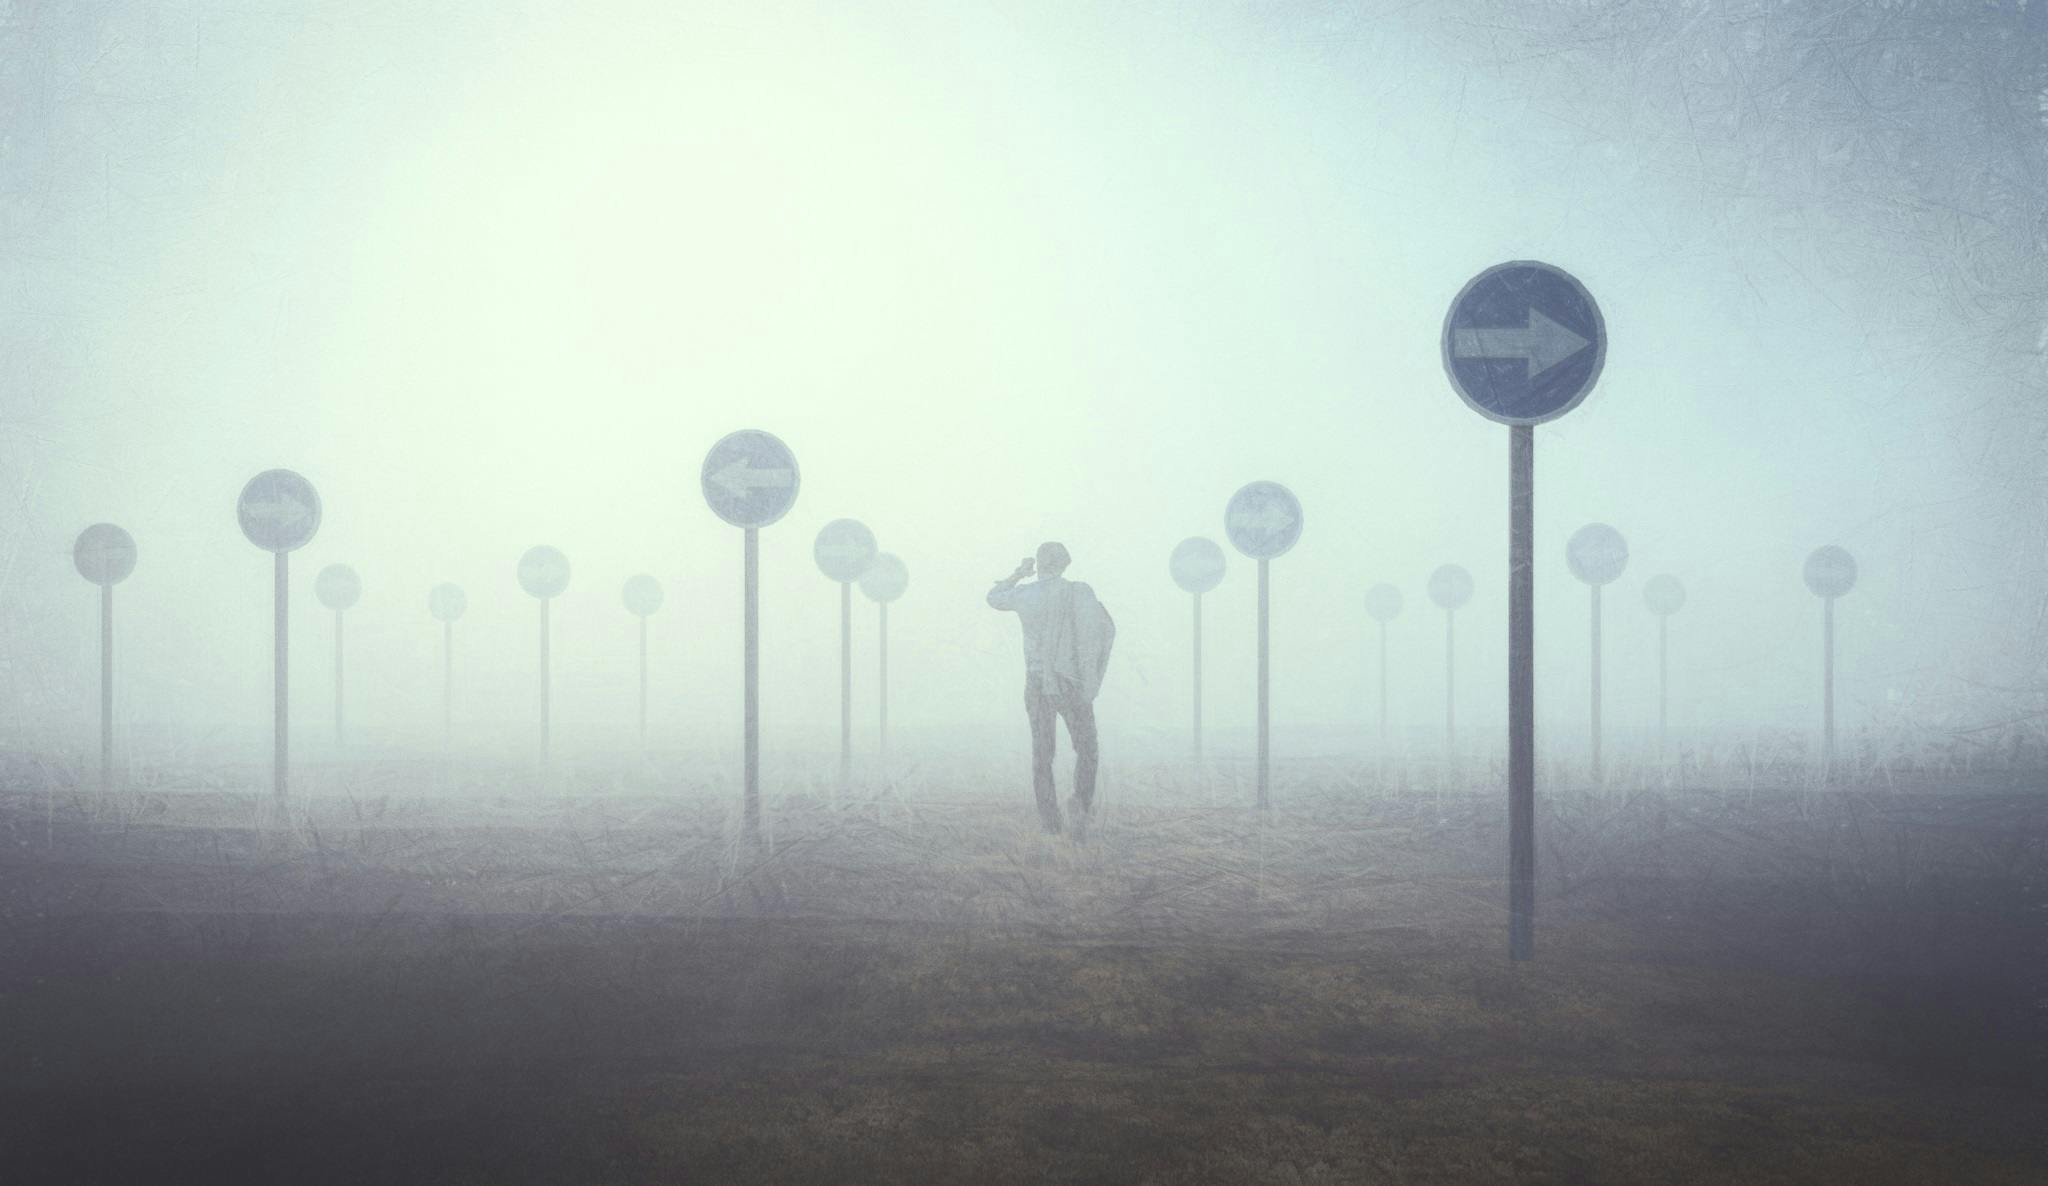 Man lost in the fog